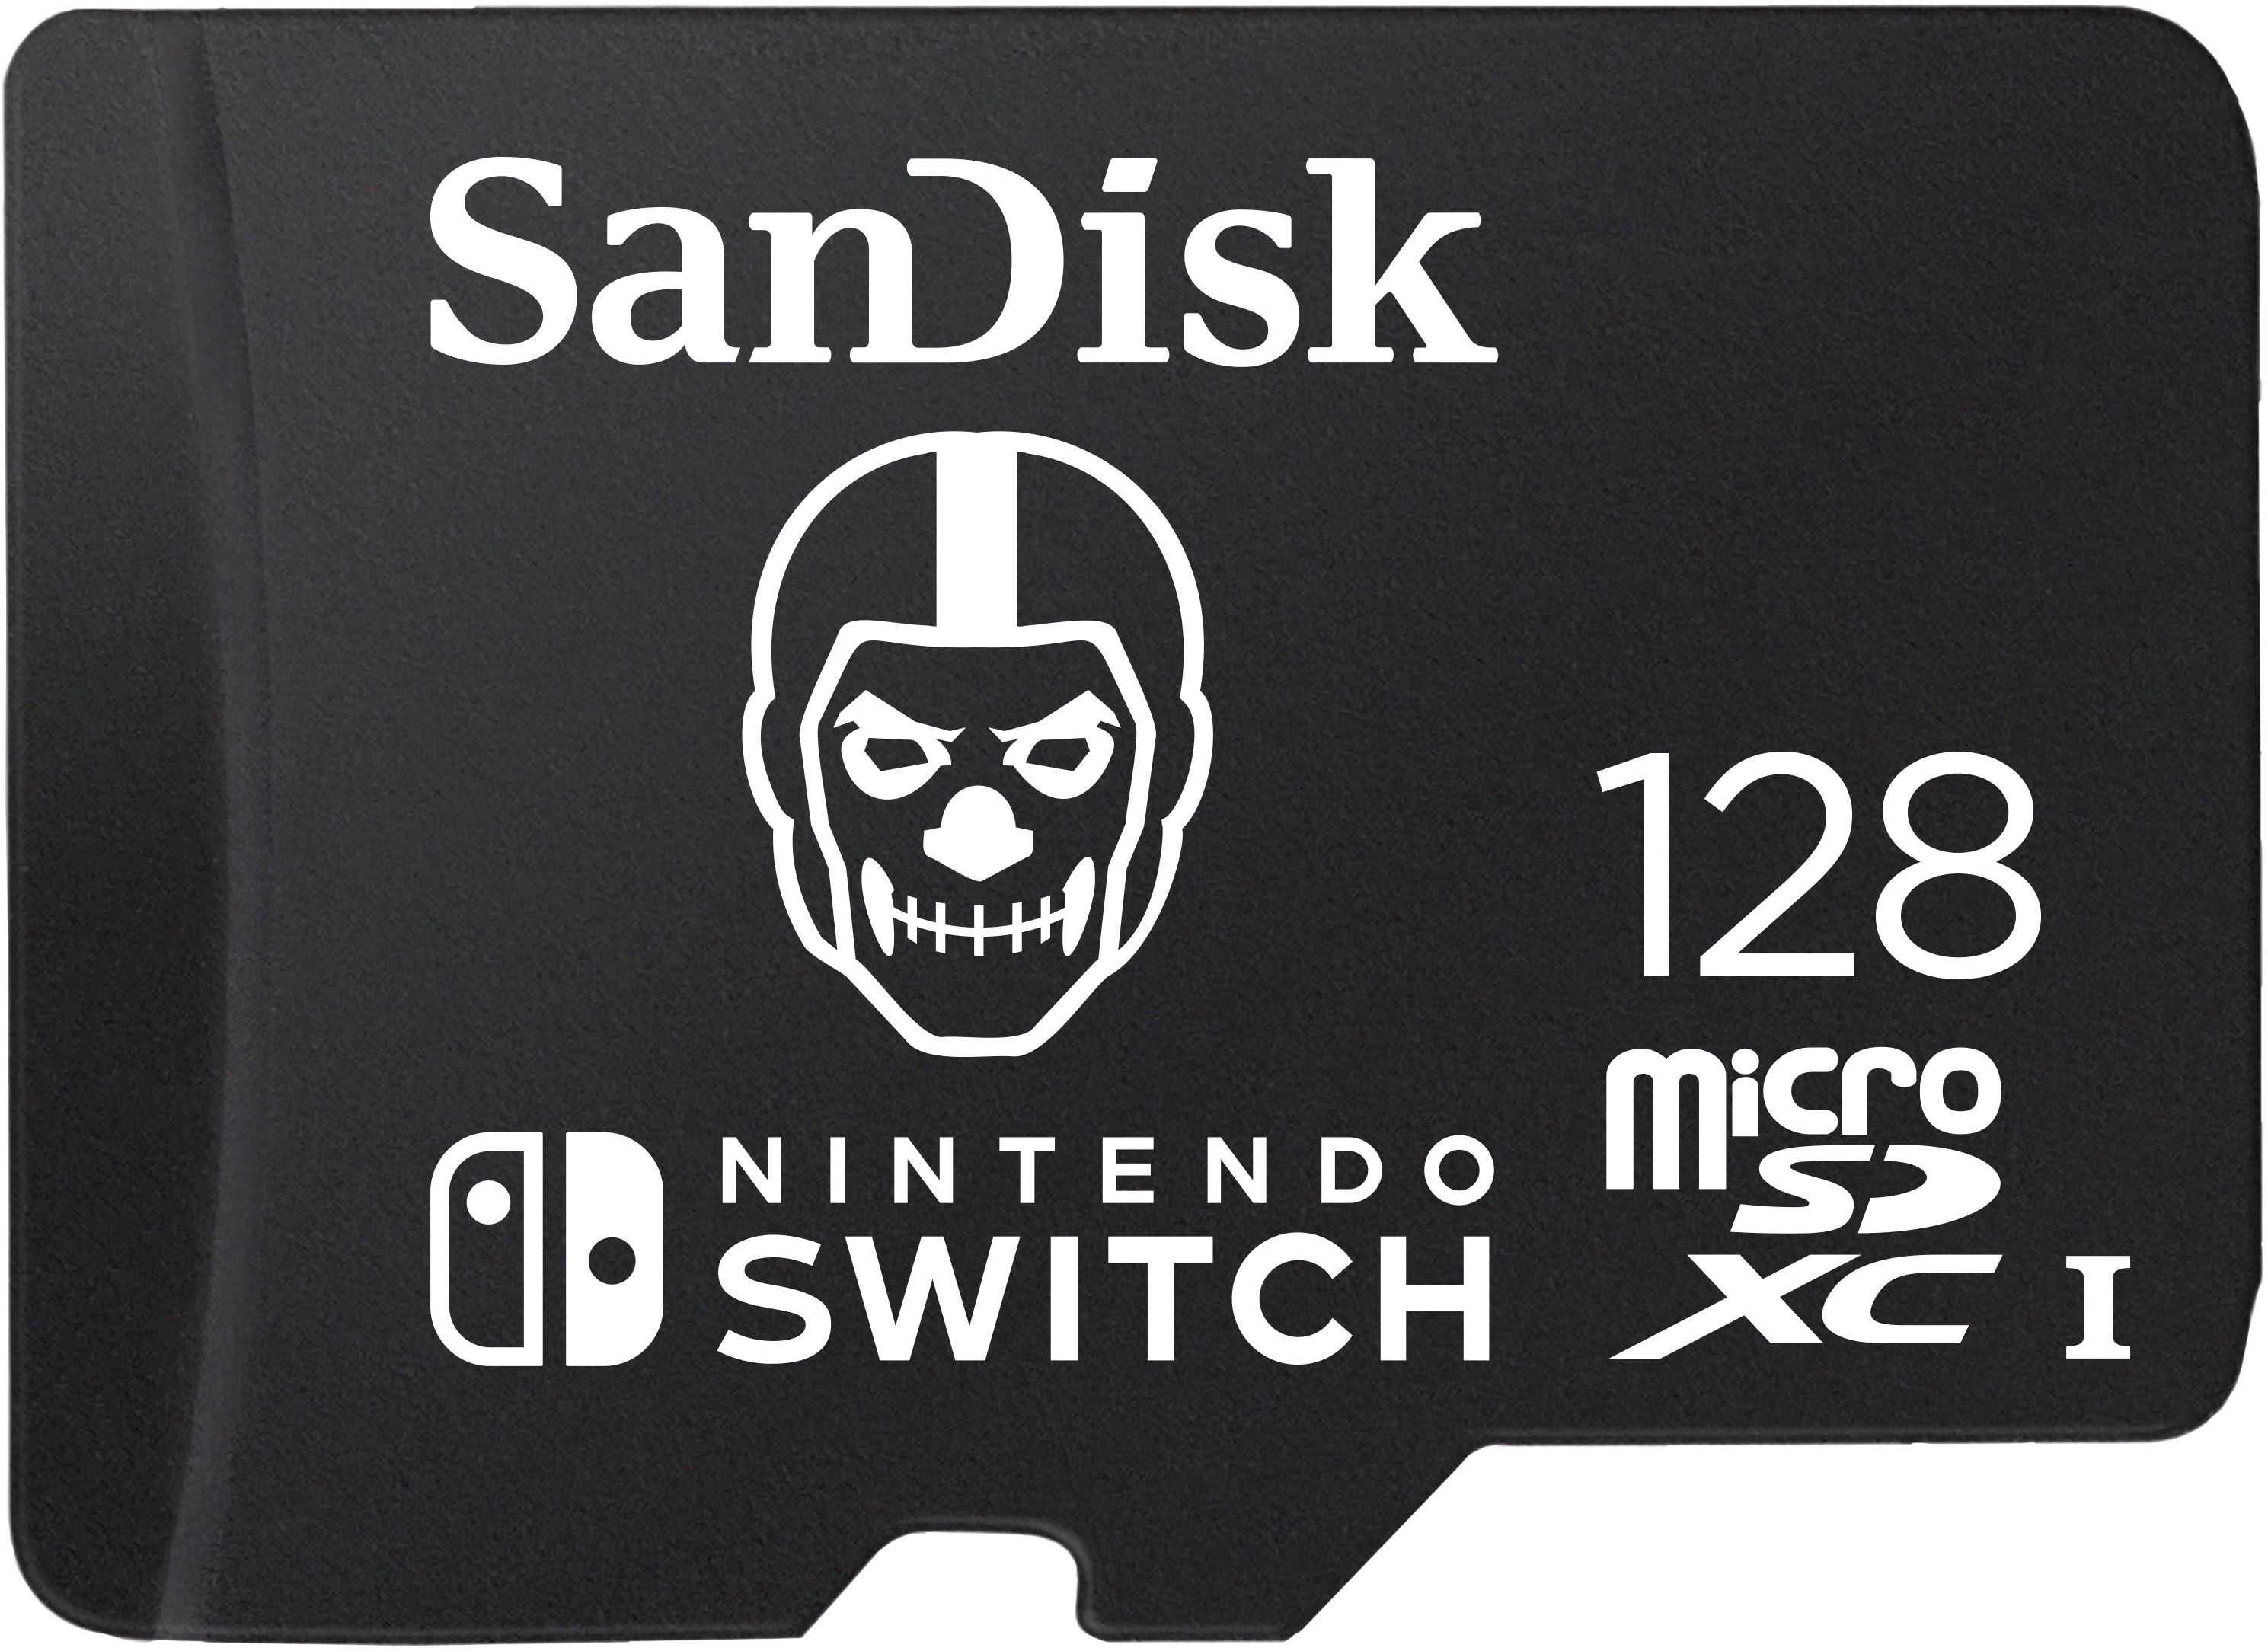 SanDisk 128GB microSDXC UHS-I Memory Card for Switch Fortnite Edition SDSQXAO-128G-AN6ZG - Best